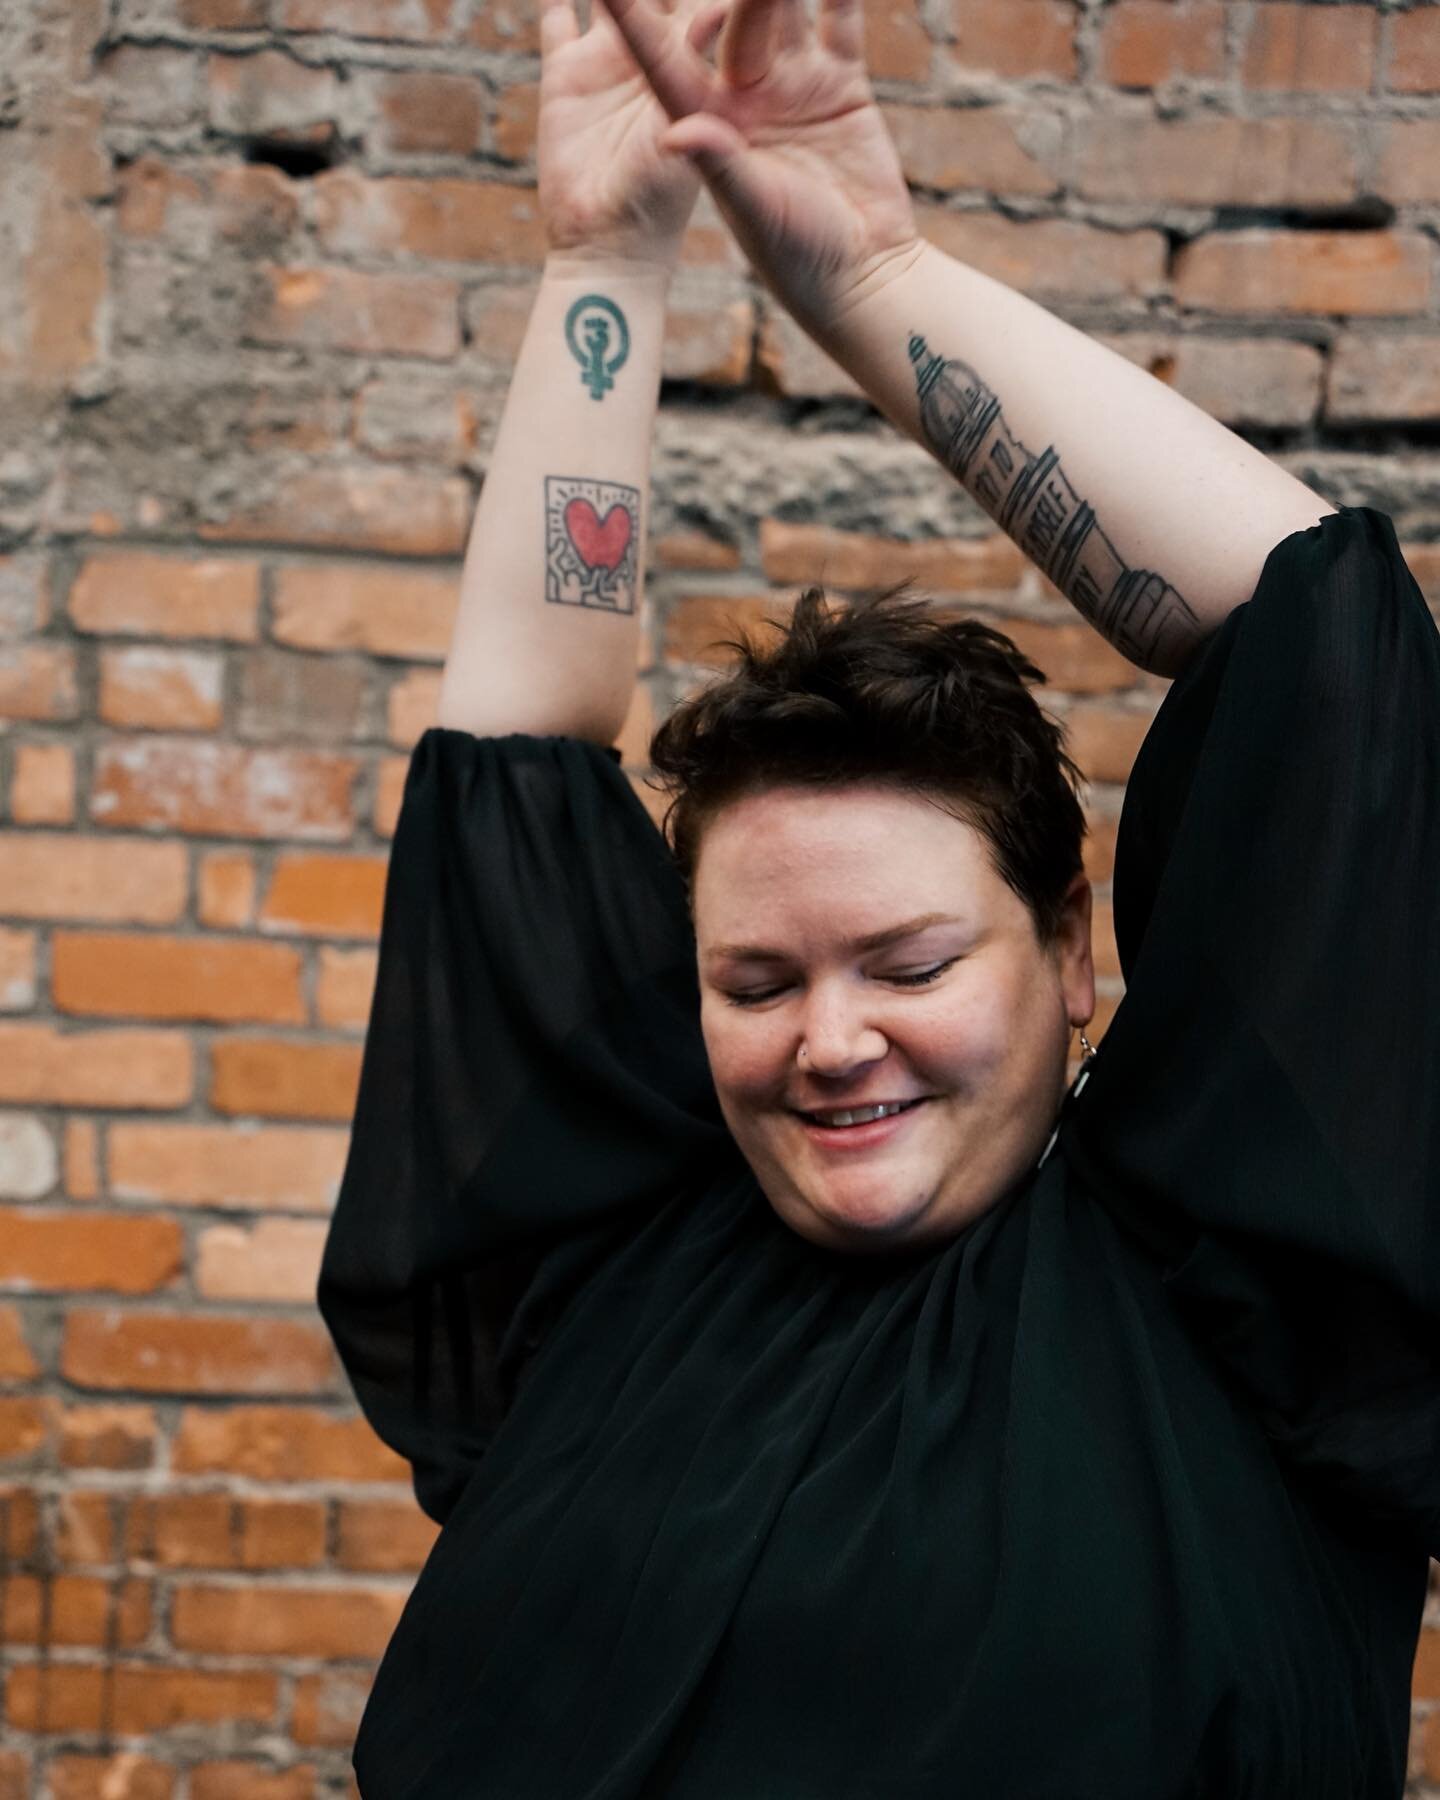 Introducing the models for &lsquo;Fat People in Photos&rsquo; - next, ✨ JULIET ✨ @angryandadorable

ABOUT JULIET:  Juliet (she/her) is a queer fat social worker and arts administrator. A life-long resident of Mohkinstsis/Calgary, she has been involve